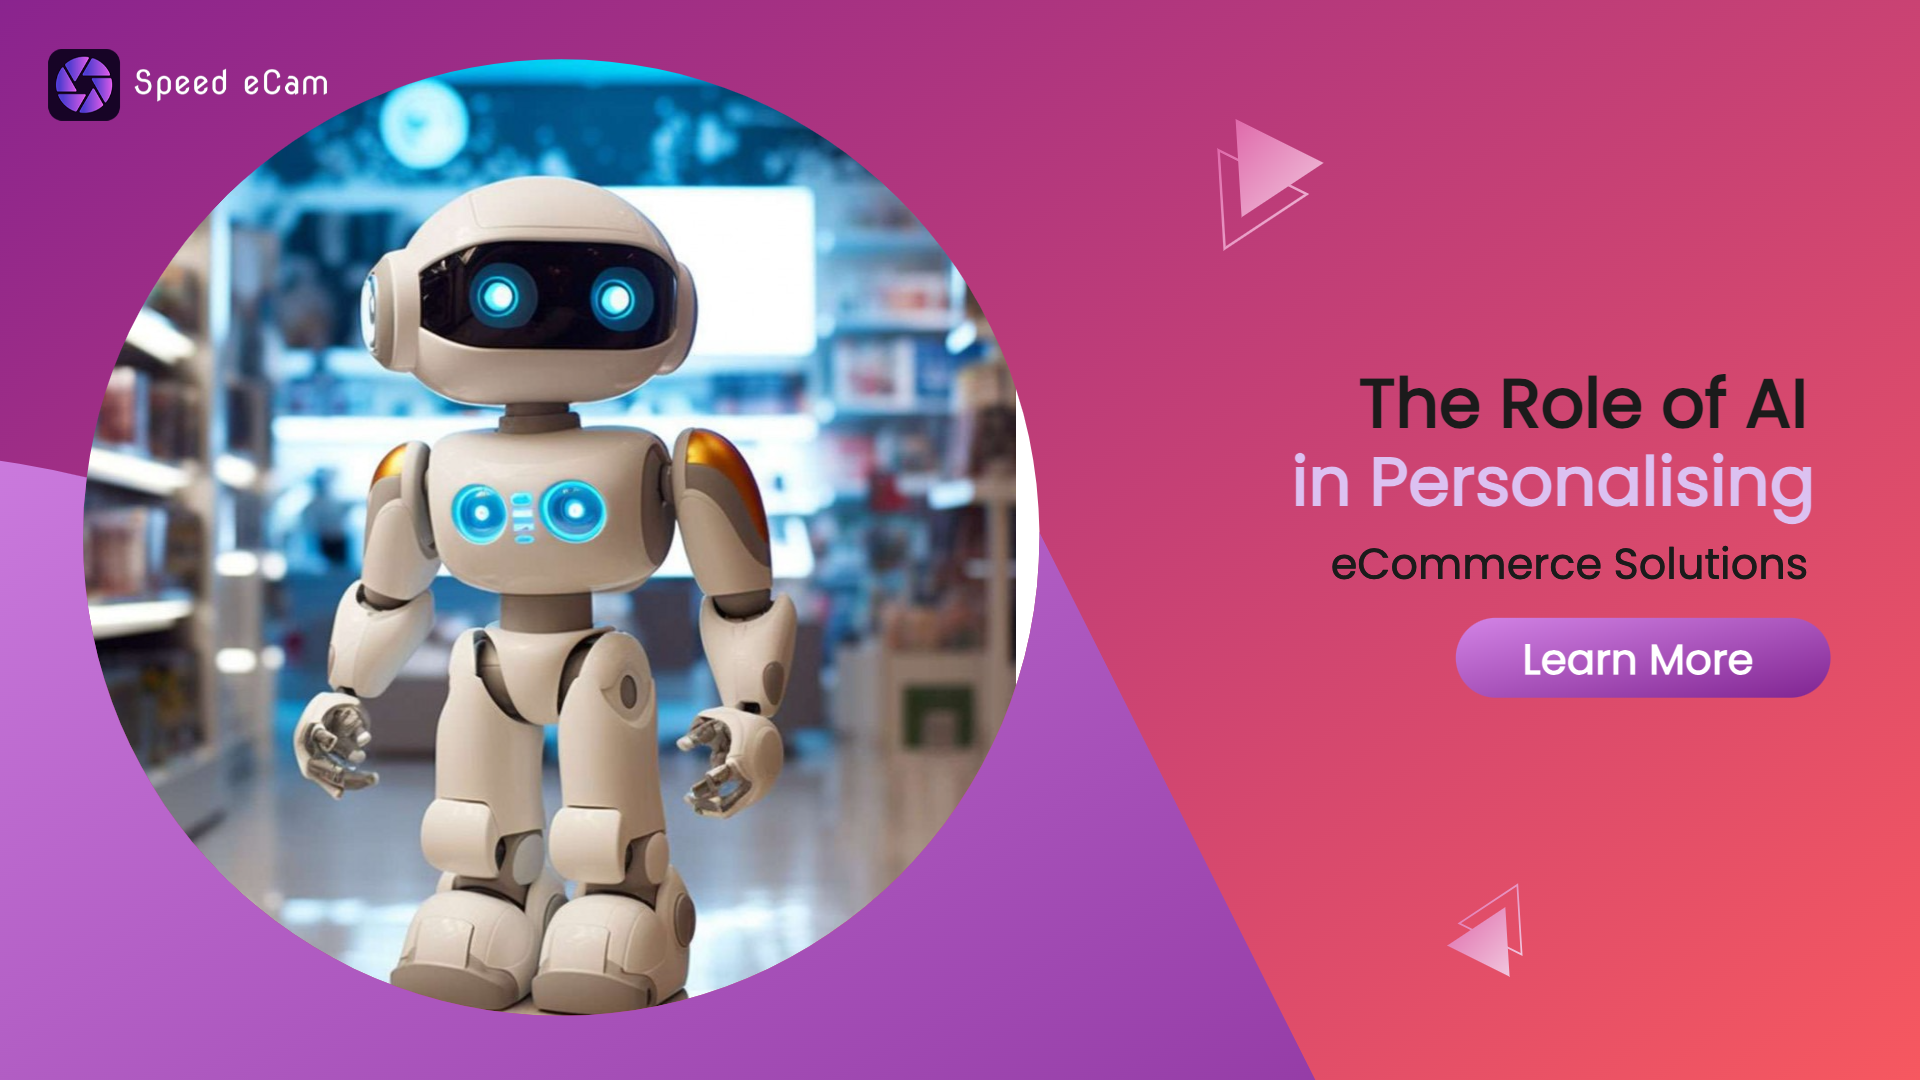 The Role of AI in Personalising eCommerce Solutions